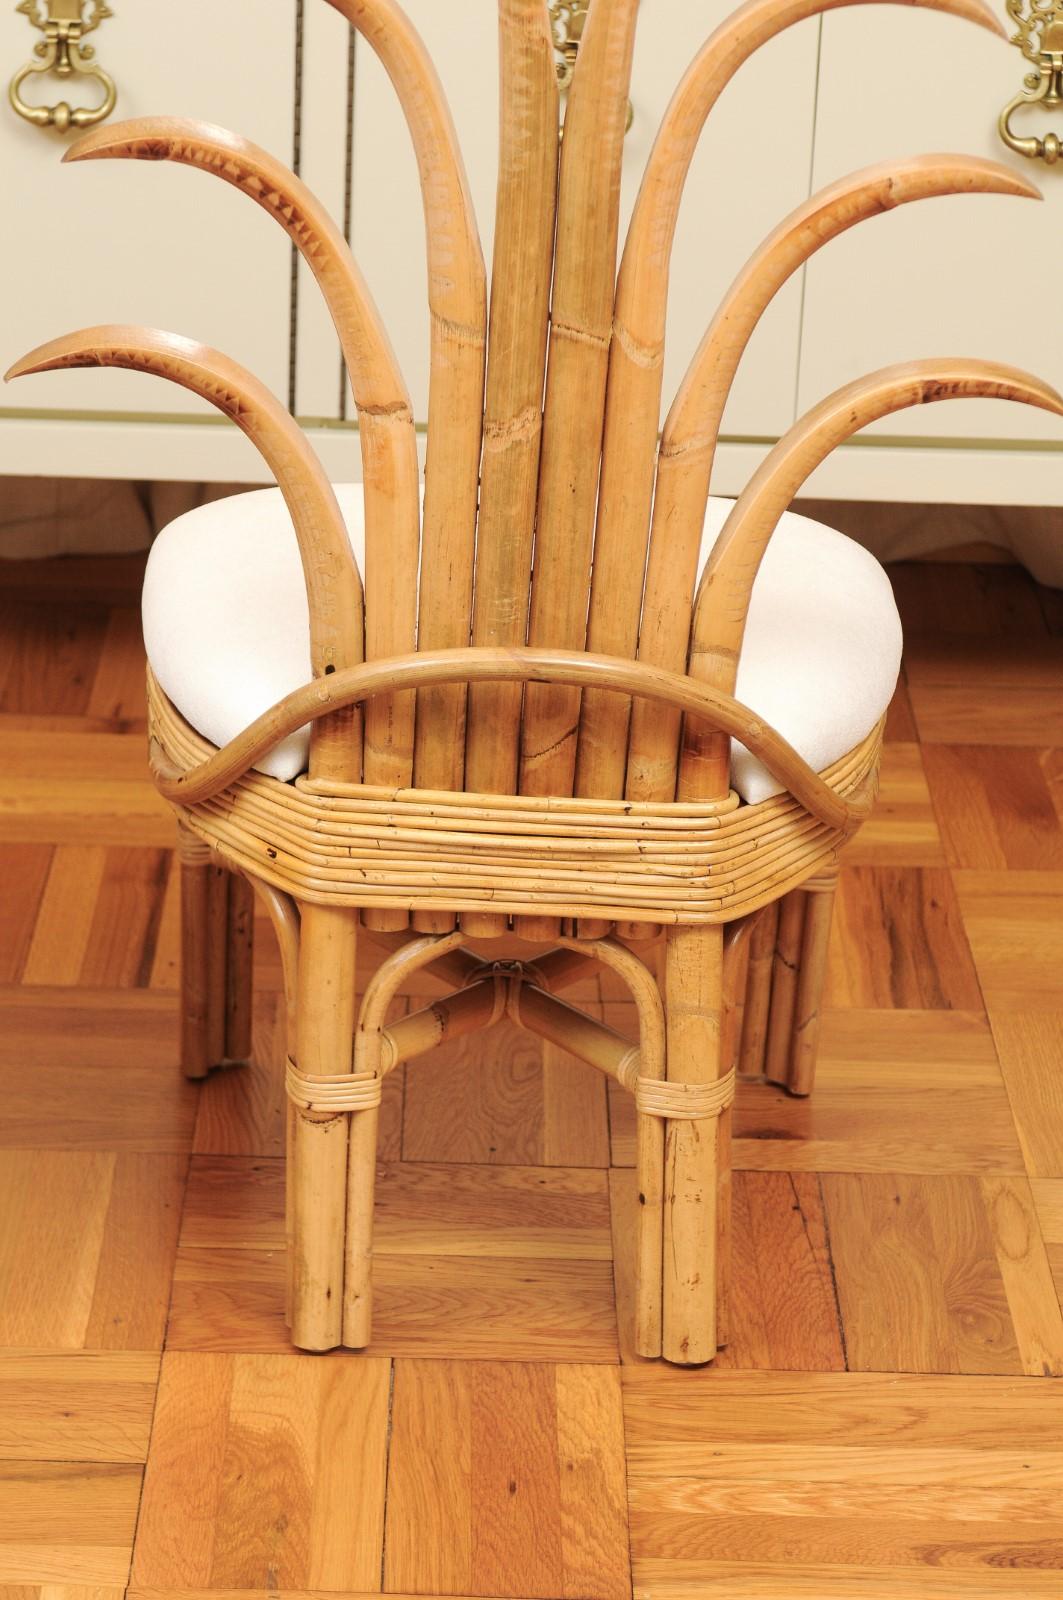 Exquisite Set of 8 Rattan and Cane Palm Frond Dining Chairs, circa 1950 For Sale 1